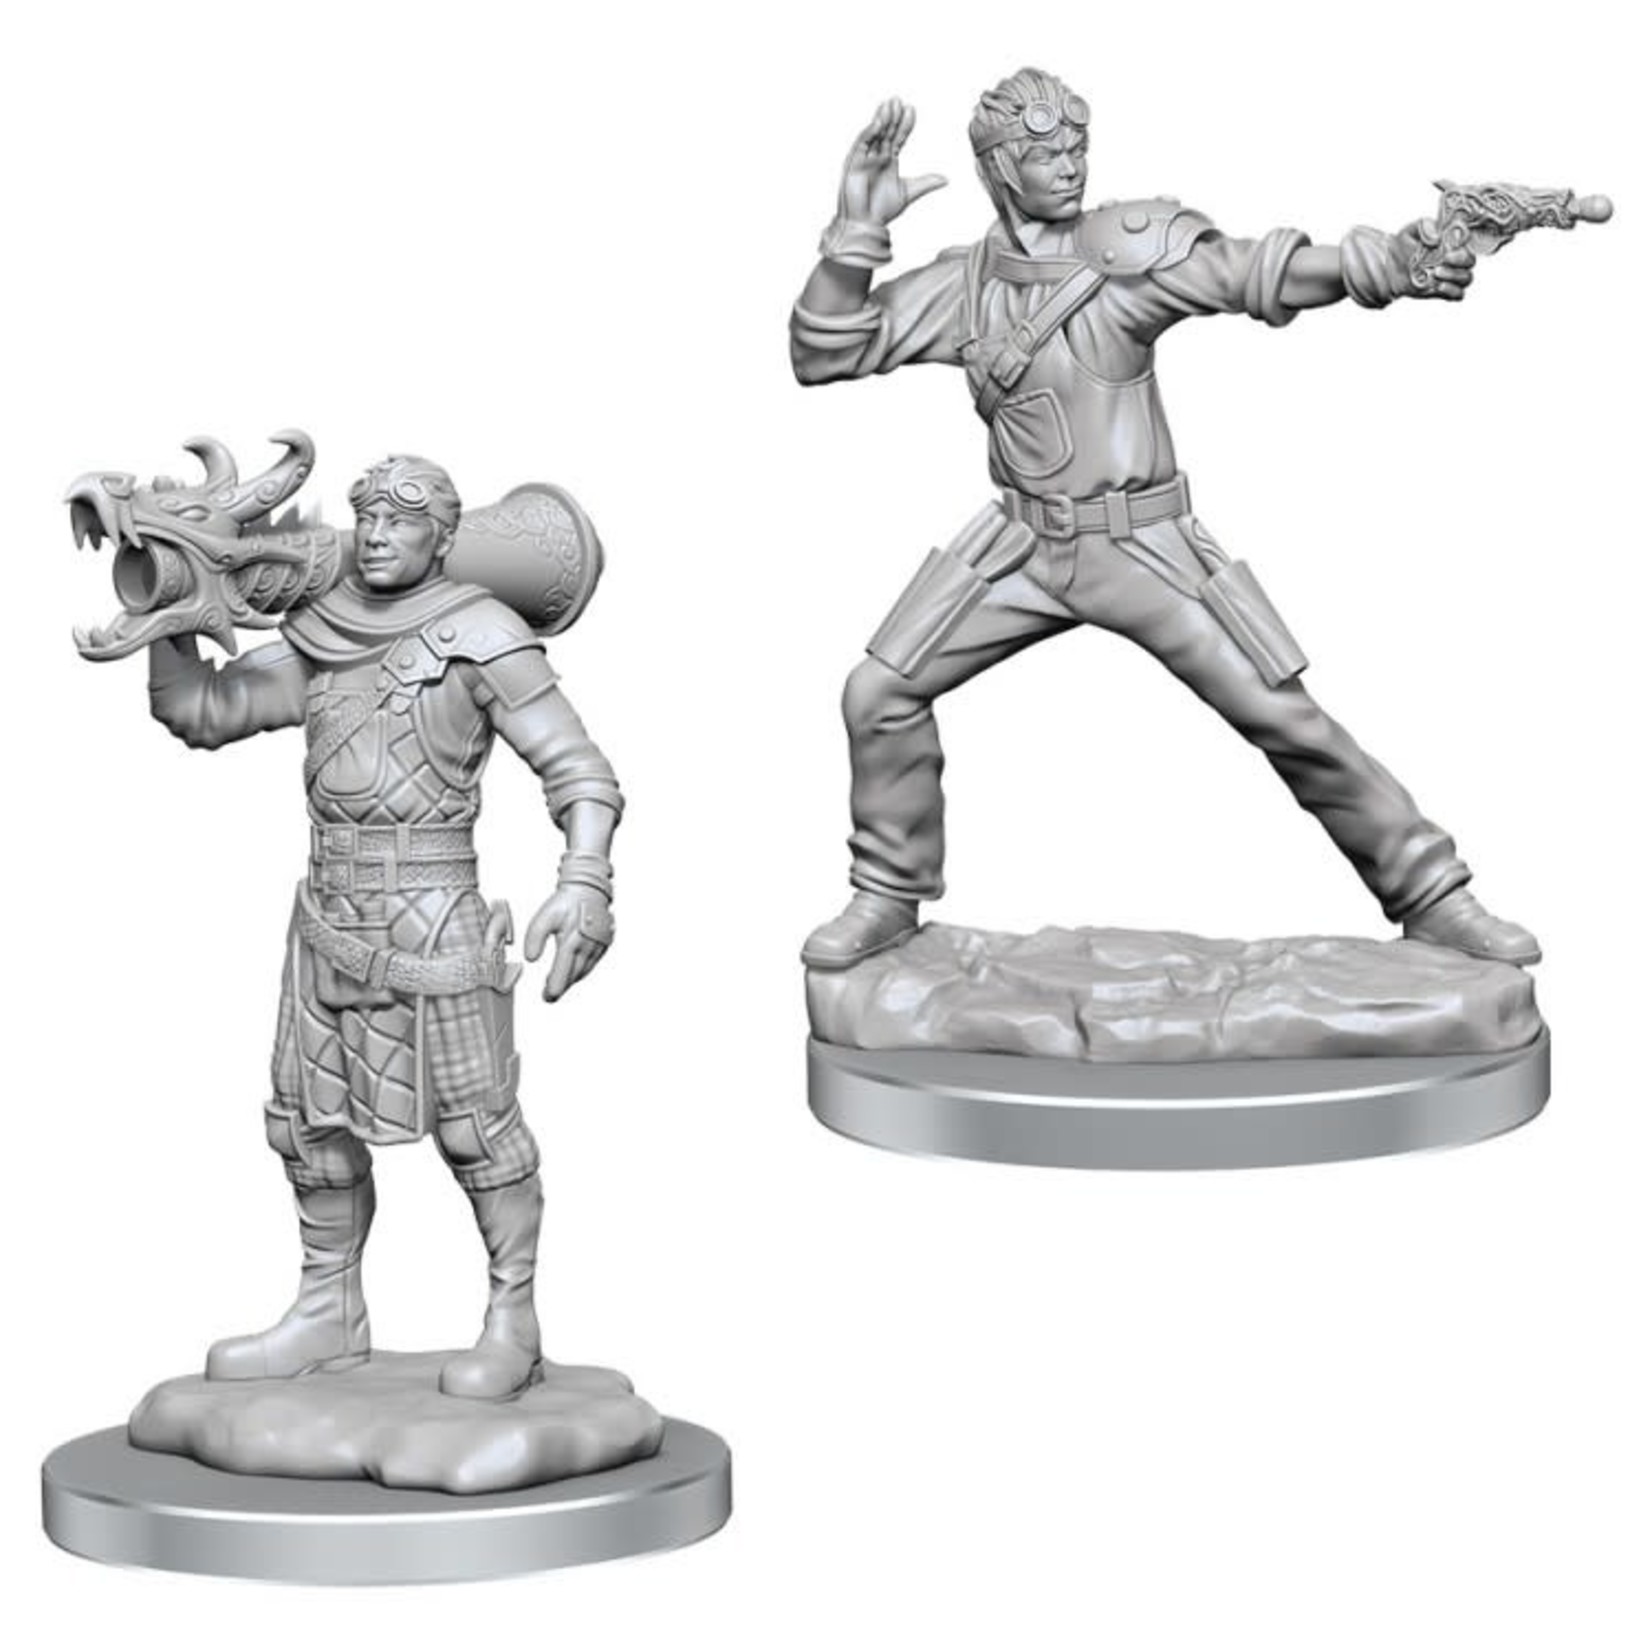 WizKids Dungeons and Dragons Nolzur's Marvelous Minis Human Artificer and Human Apprentice